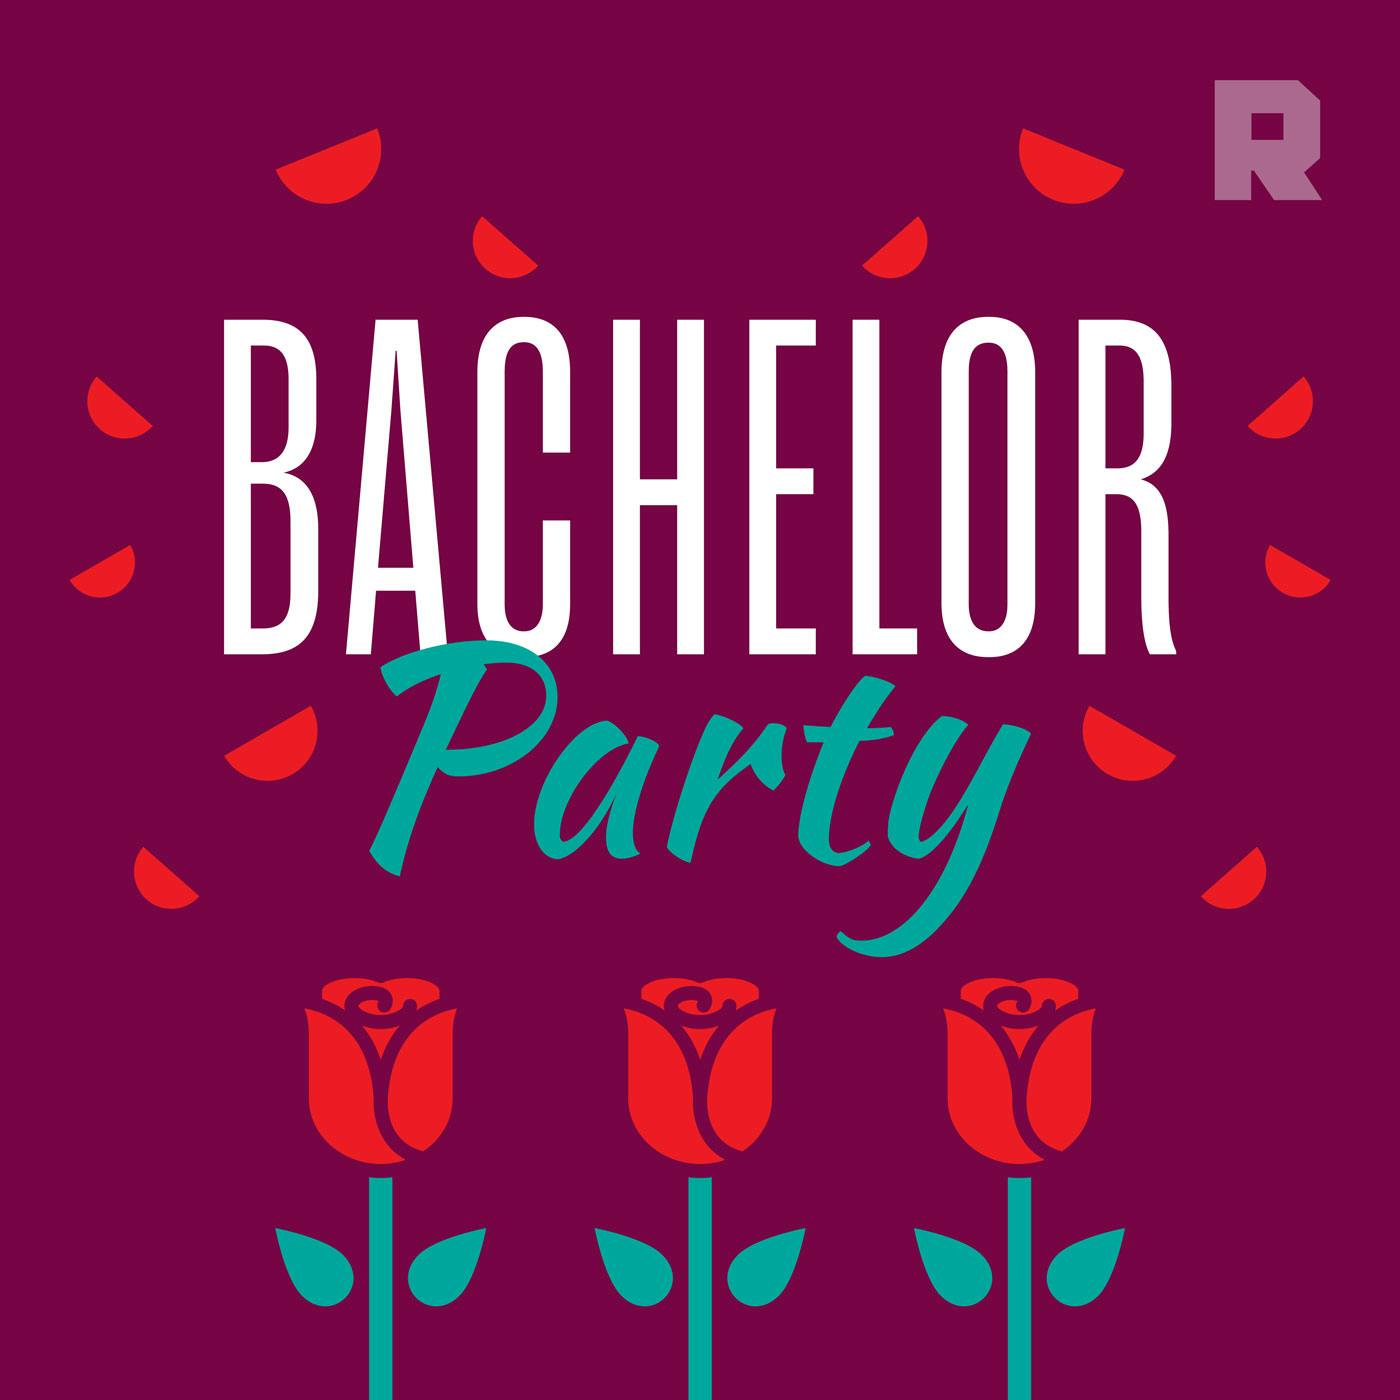 Chris Harrison Officially Exits the ‘Bachelor’ Franchise